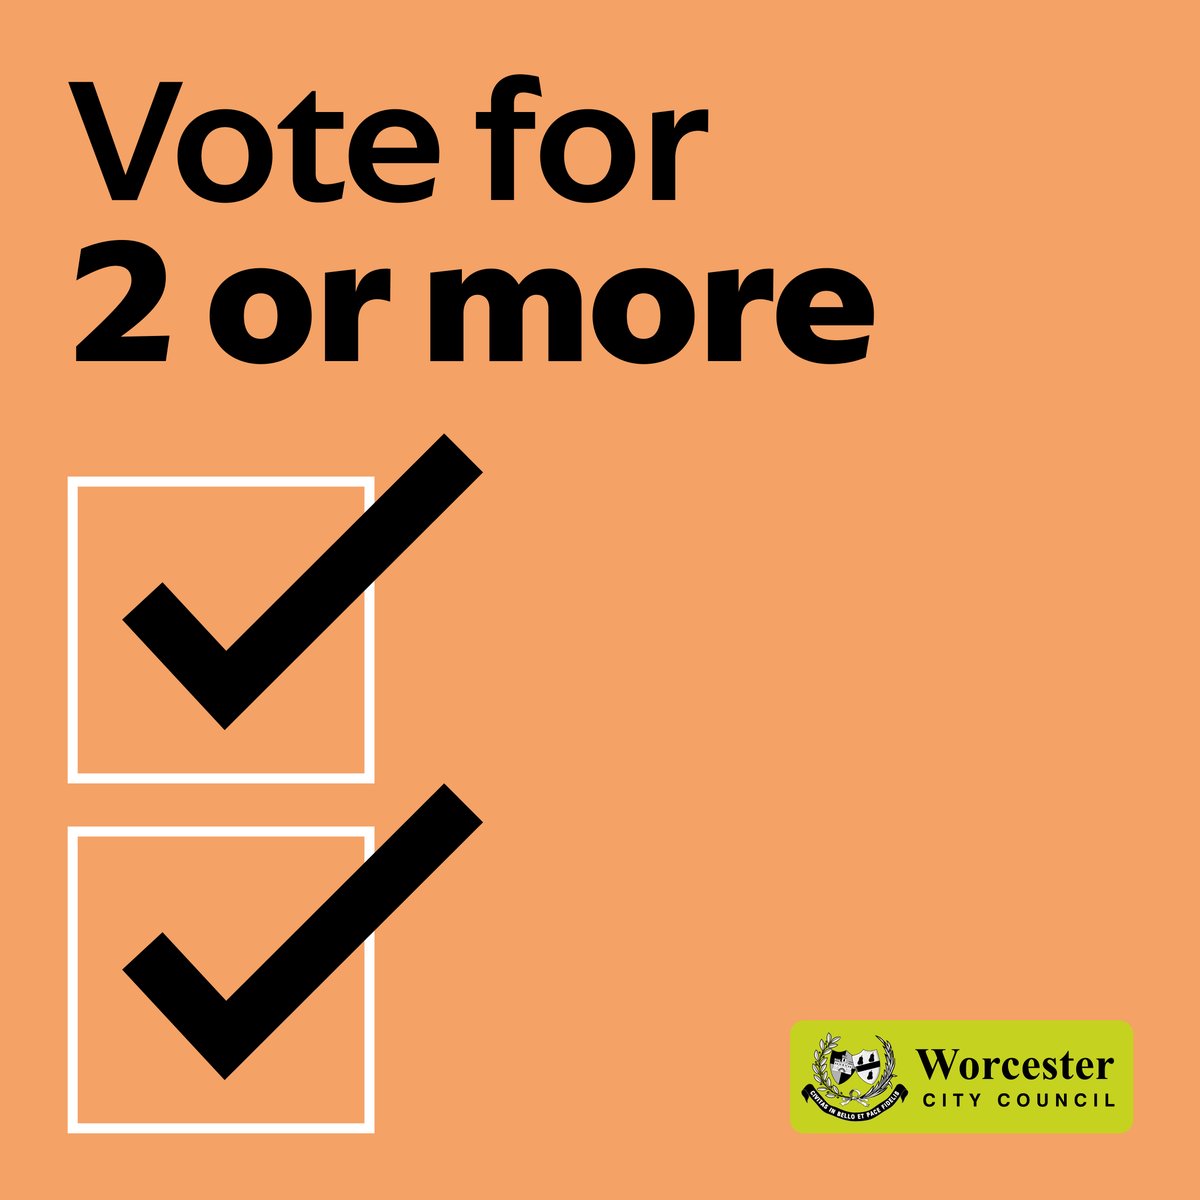 Remember you can vote for more than one councillor at the Worcester City Council local election this Thursday. Depending on where you live, you can choose either 2 or 3 councillors to represent you on local issues. Find out more here: bit.ly/3UbUuvi #Worcester